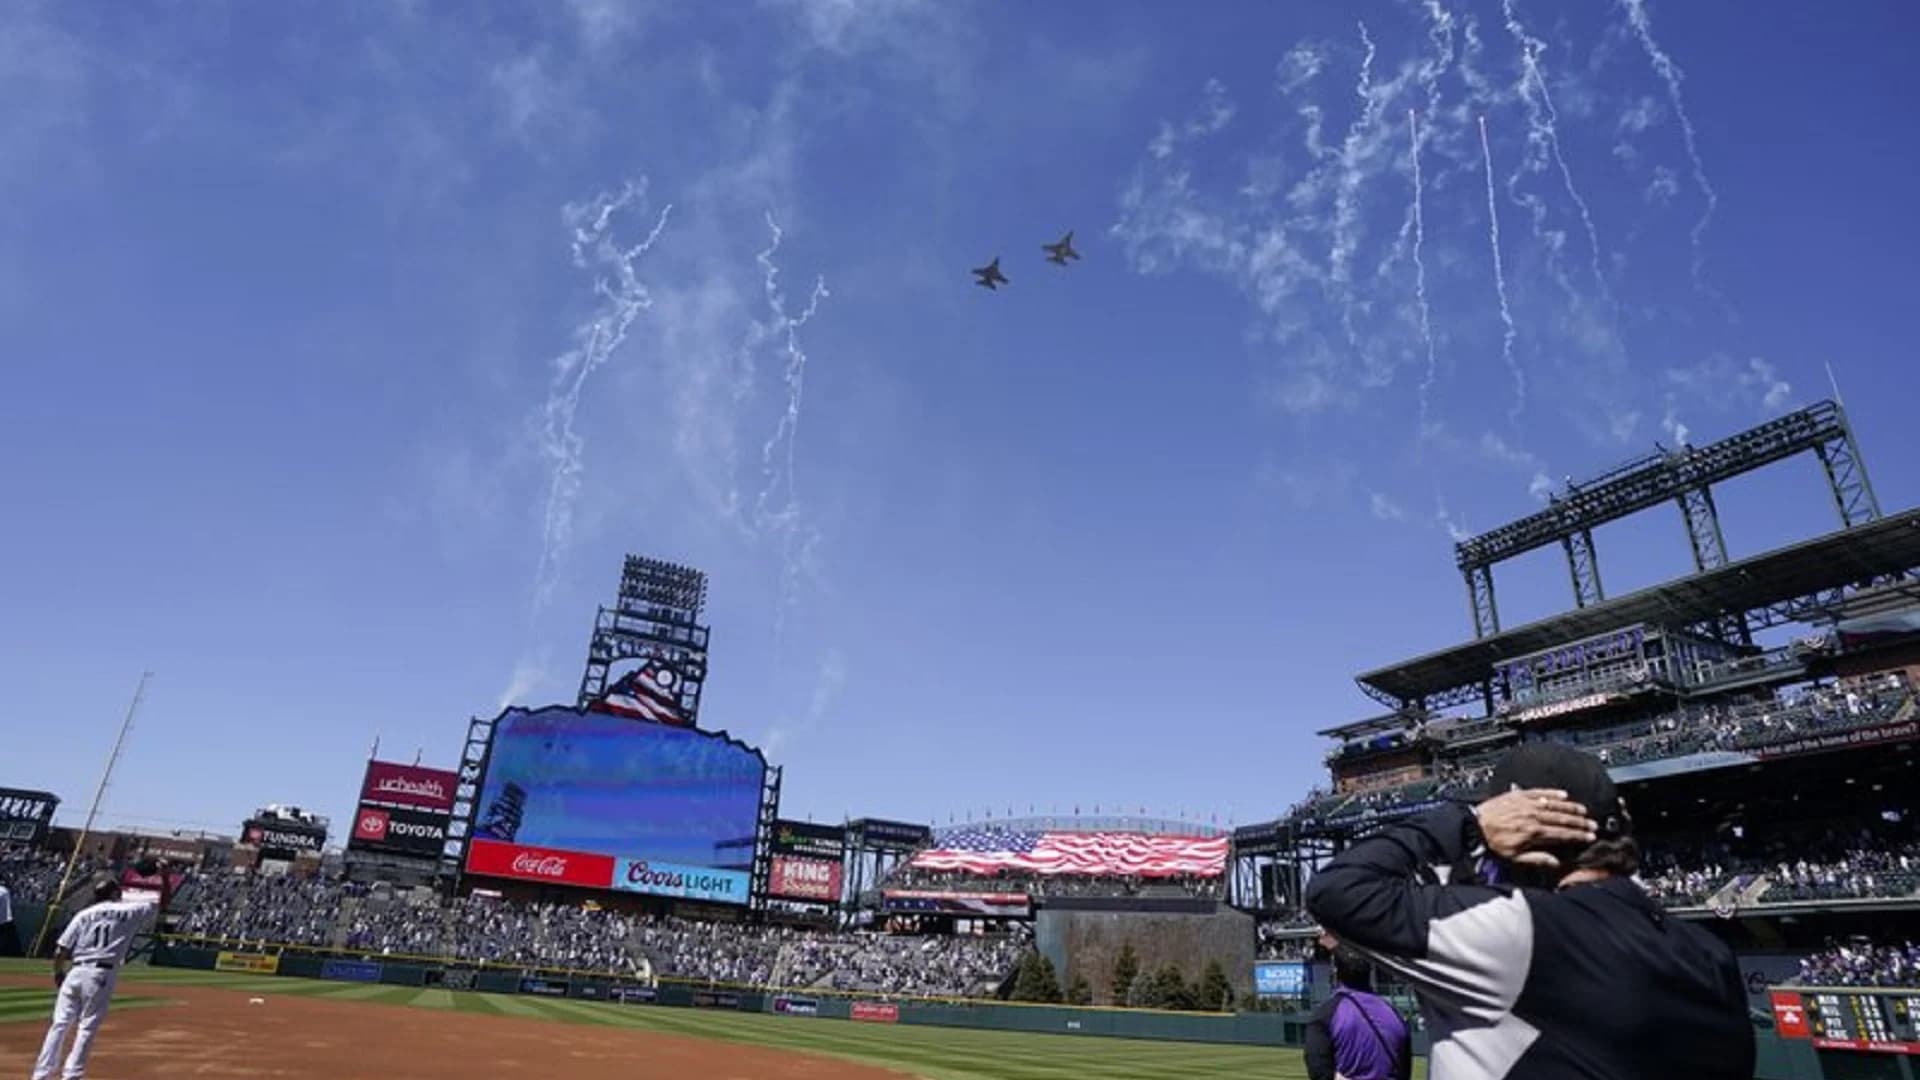 MLB officially moves All-Star Game to Denver's Coors Field